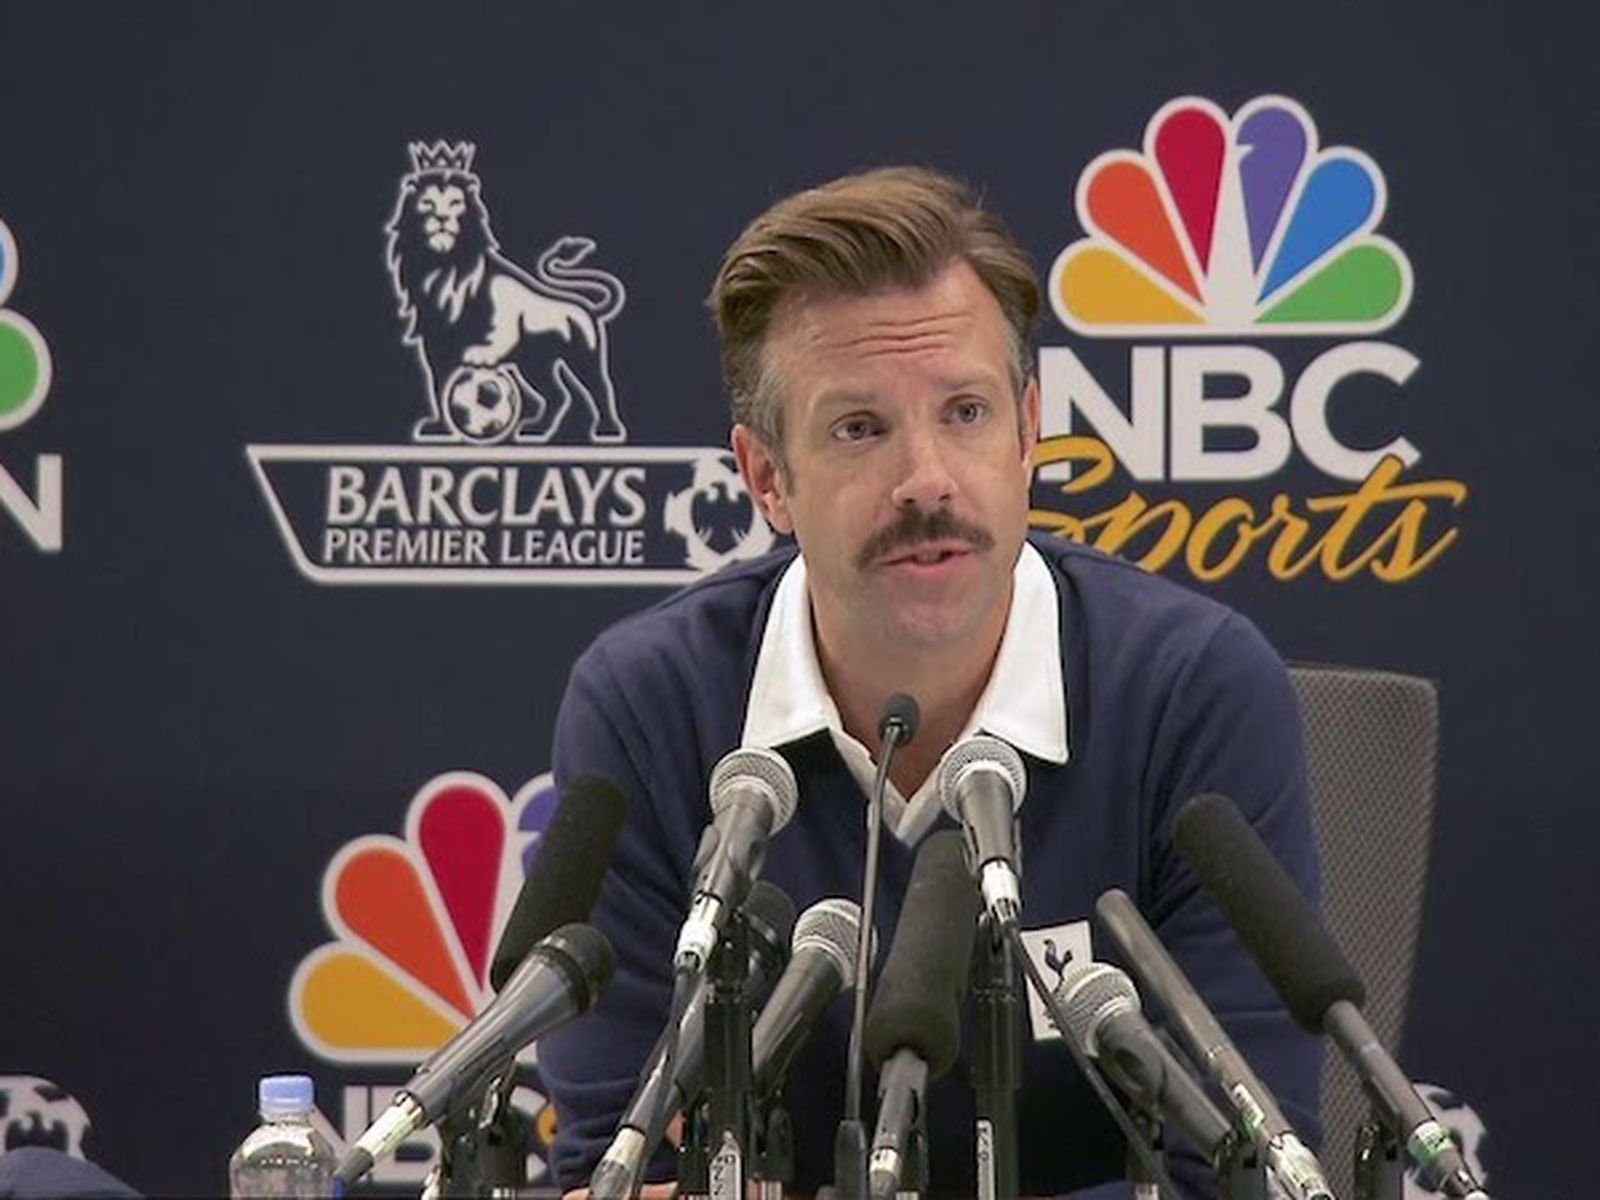 Jason Sudeikis Heads to Apple TV+ With New 'Ted Lasso' Comedy